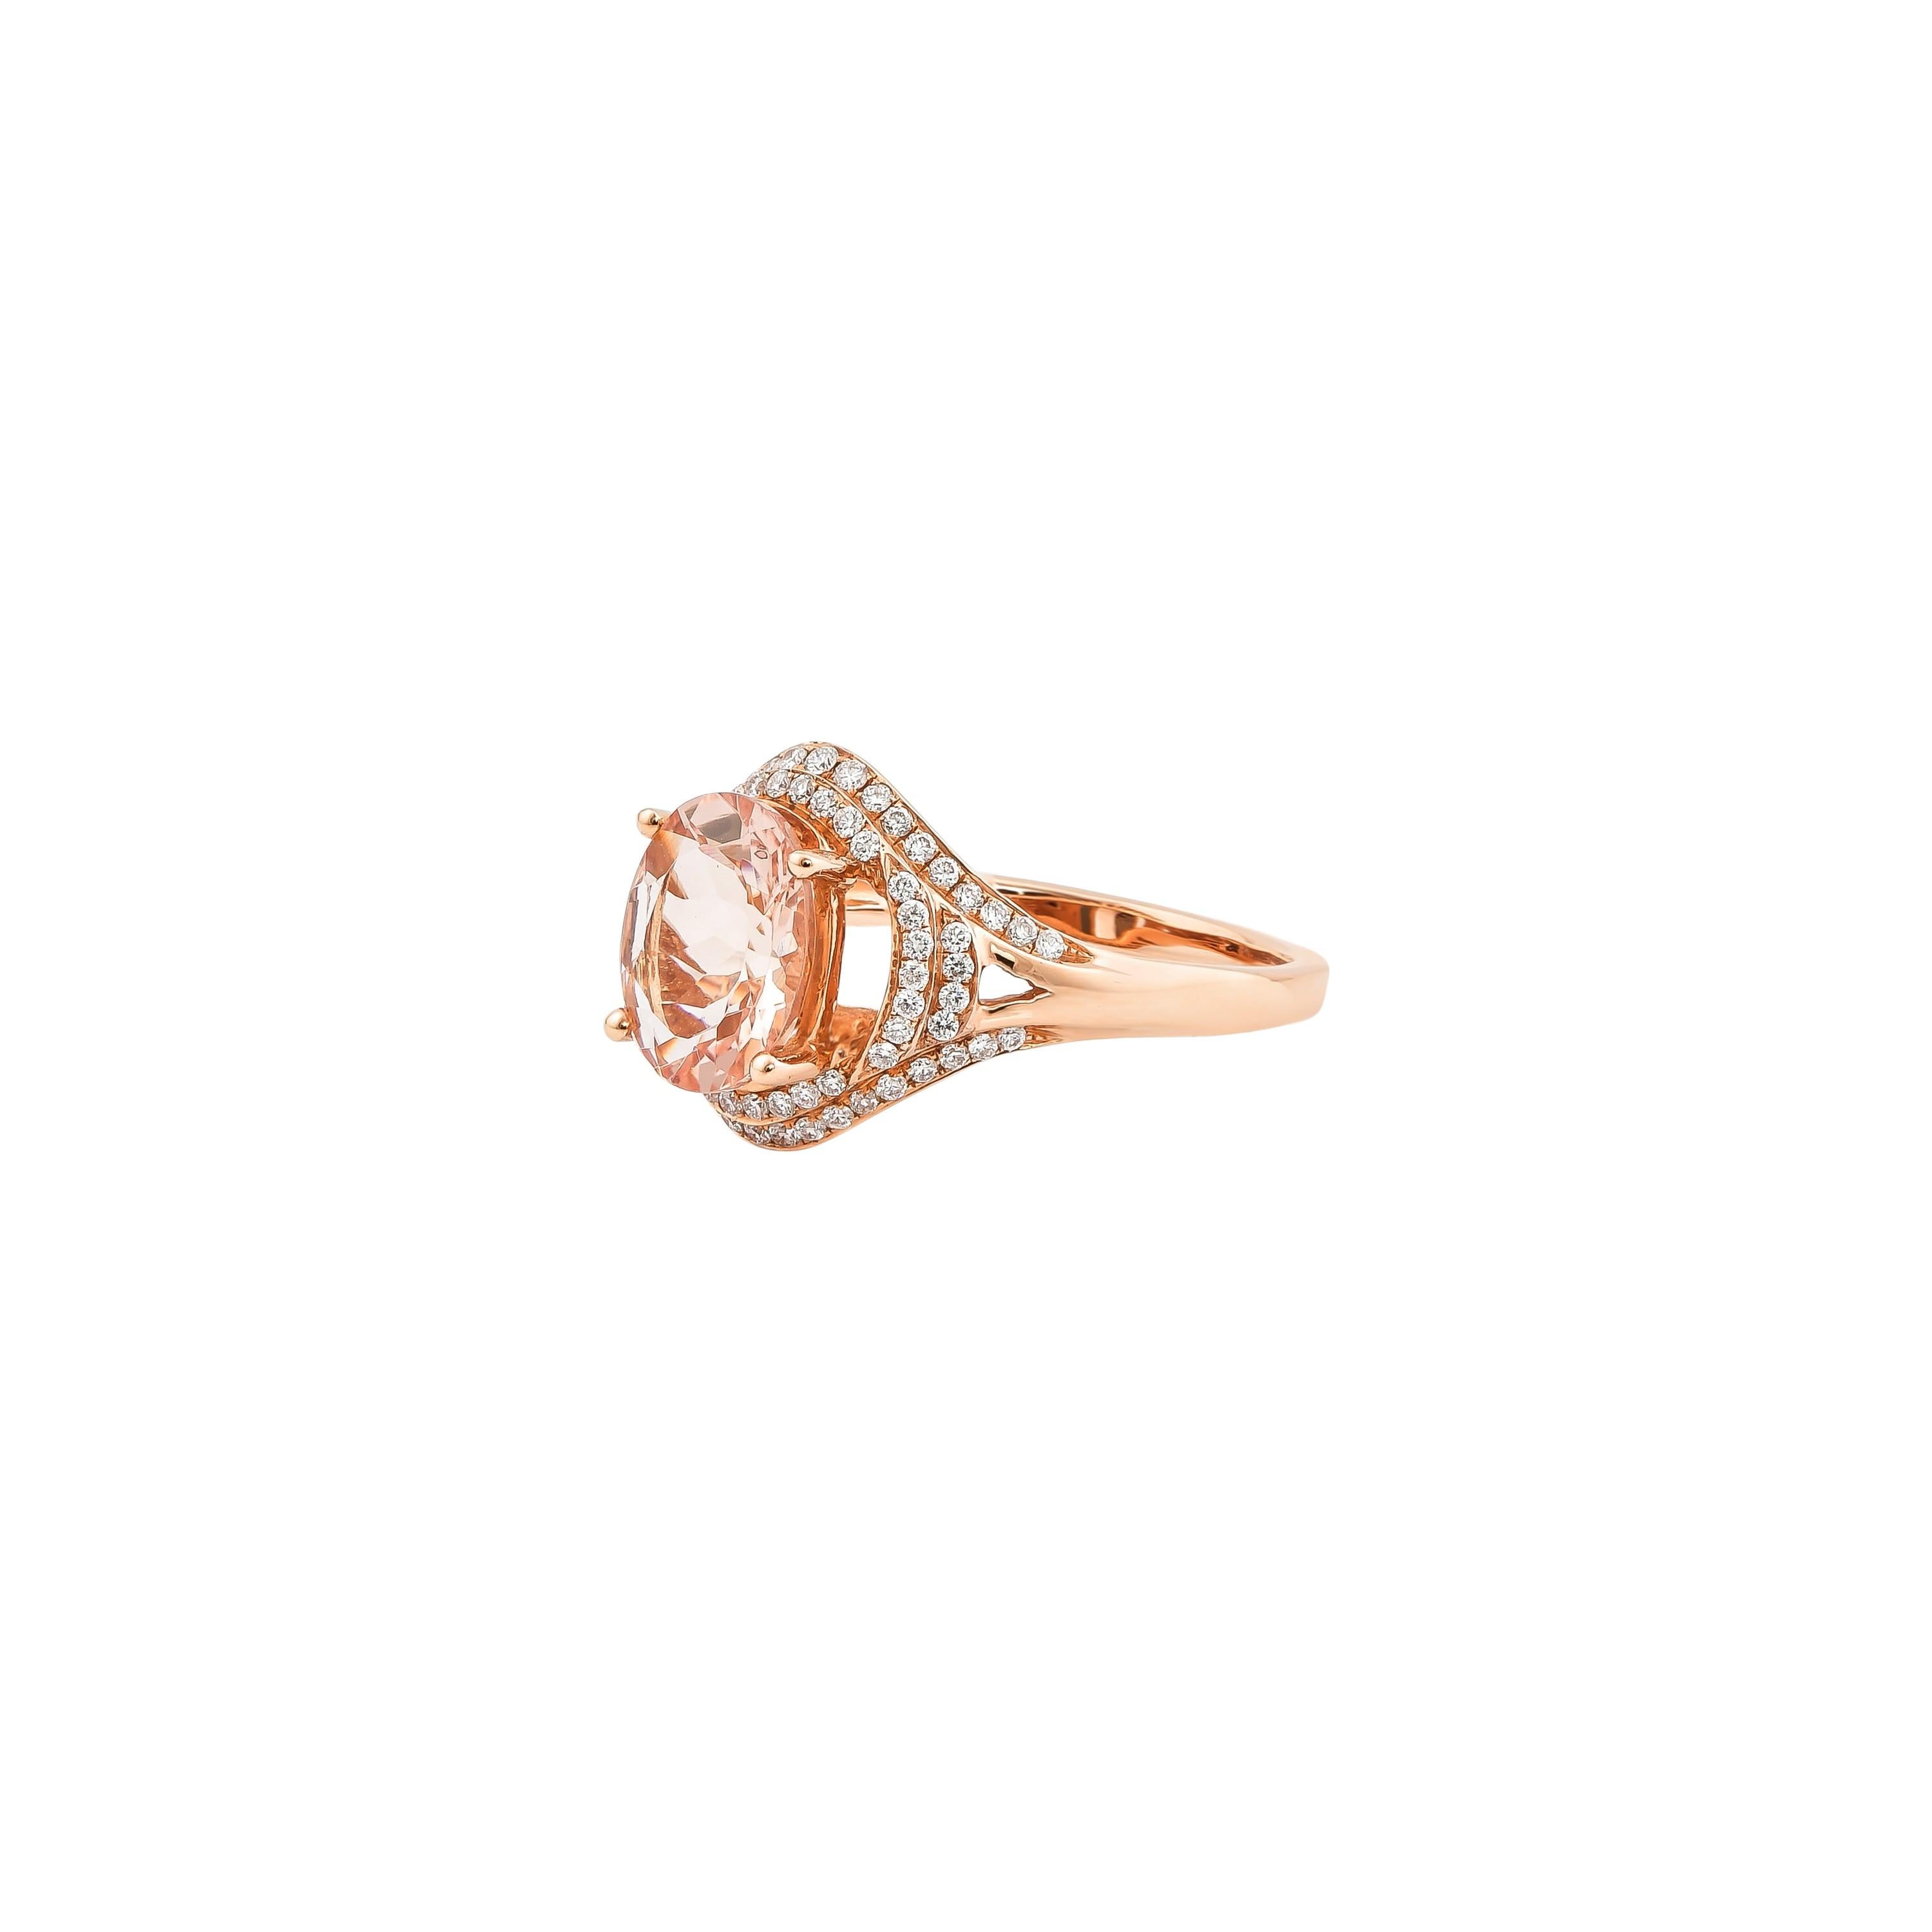 Oval Cut 2.23 Carat Morganite and Diamond Ring in 18 Karat Rose Gold For Sale